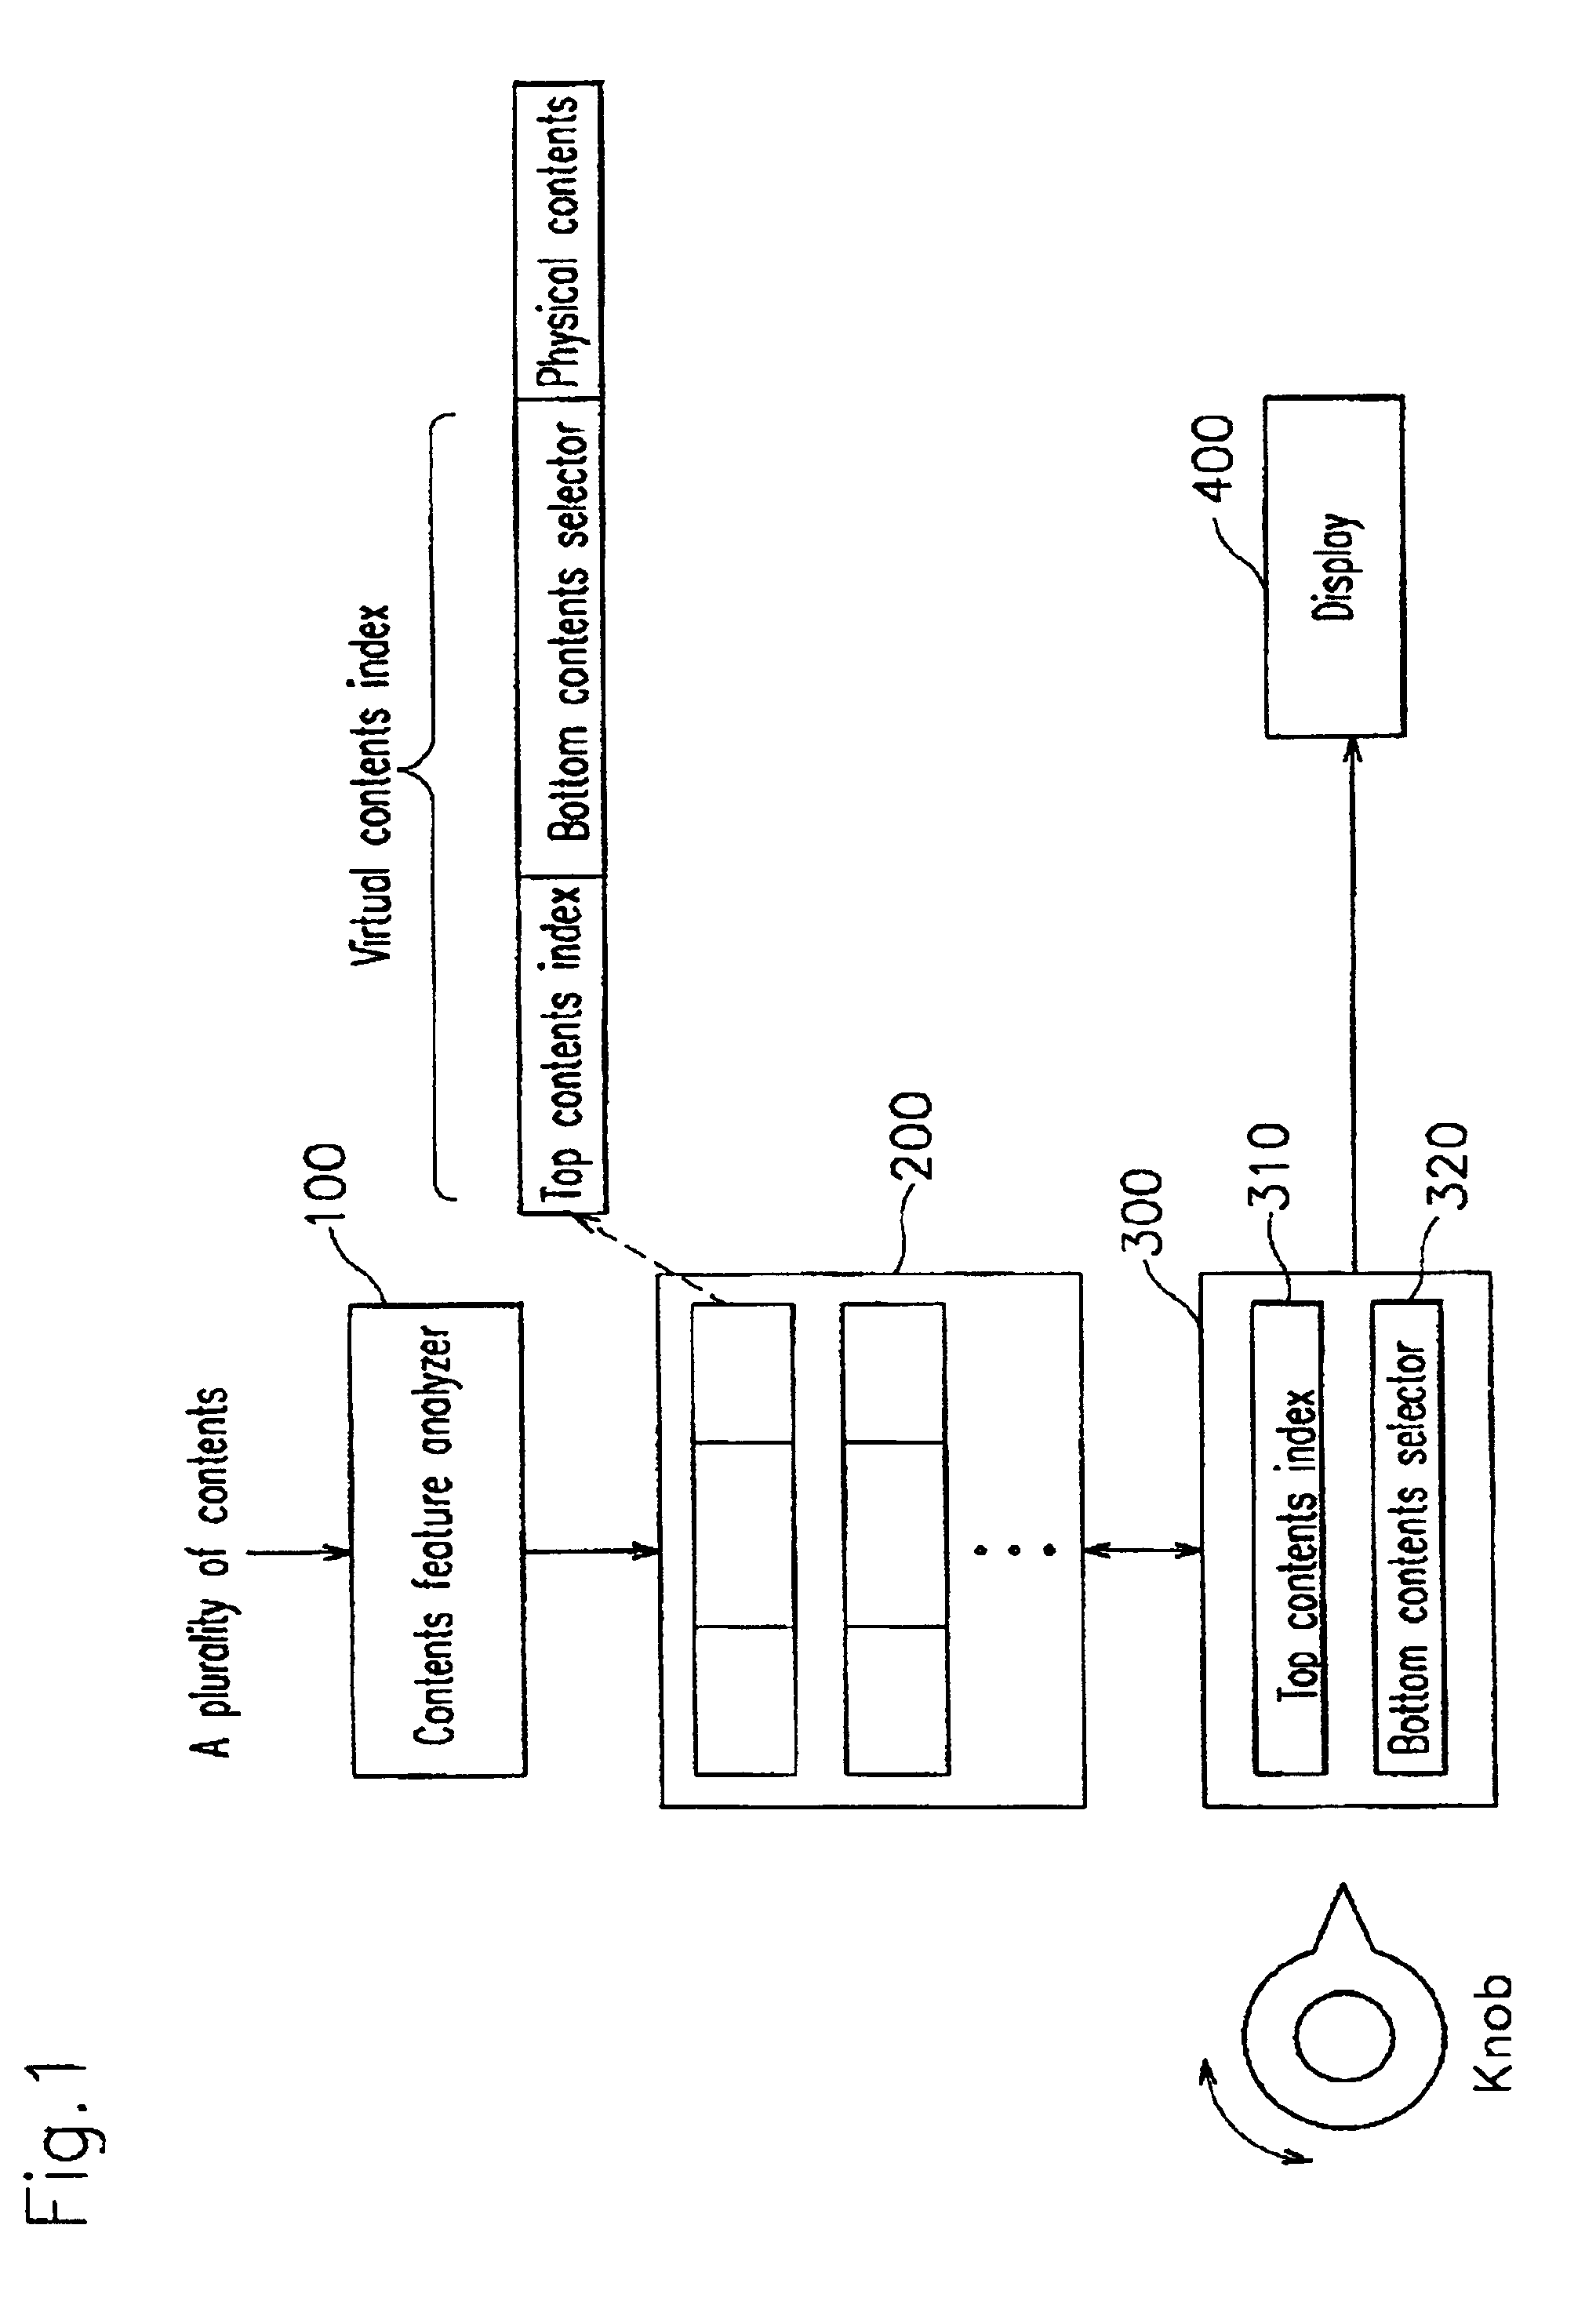 Contents browsing system with multi-level circular index and automated contents analysis function